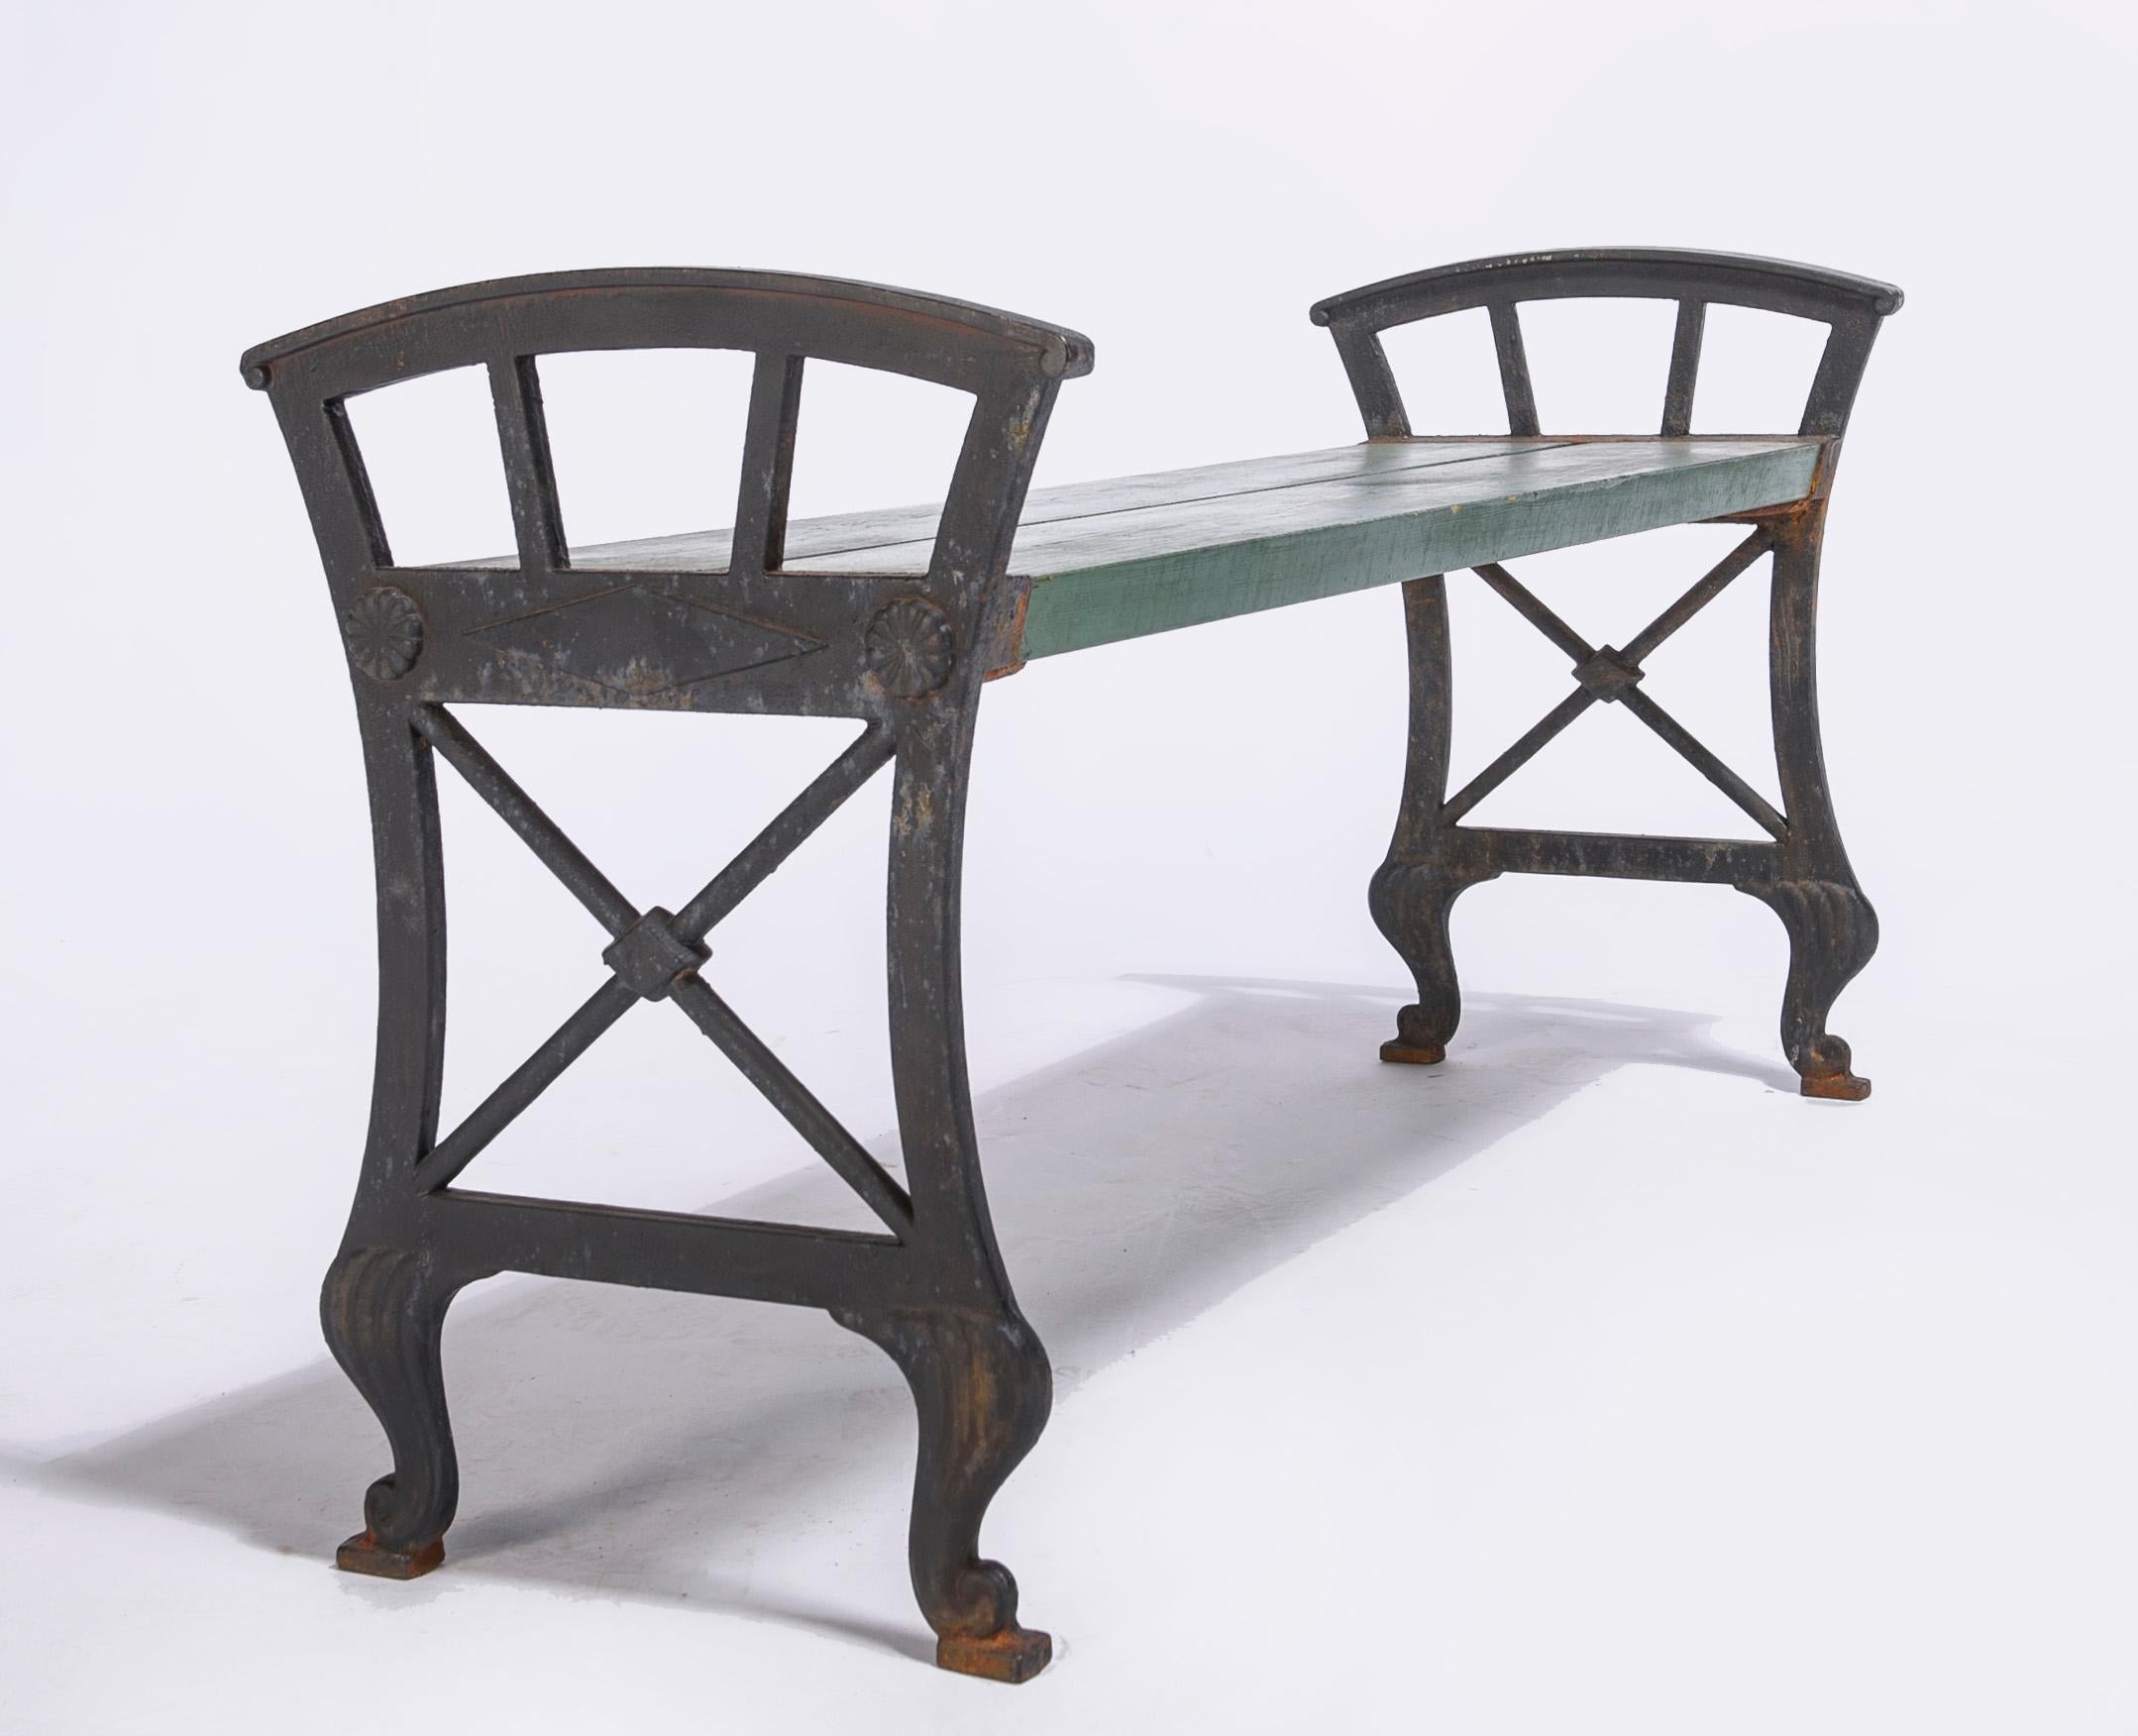 20th Century Pair of Swedish Outdoor Benches by Folke Bensow, 1920s